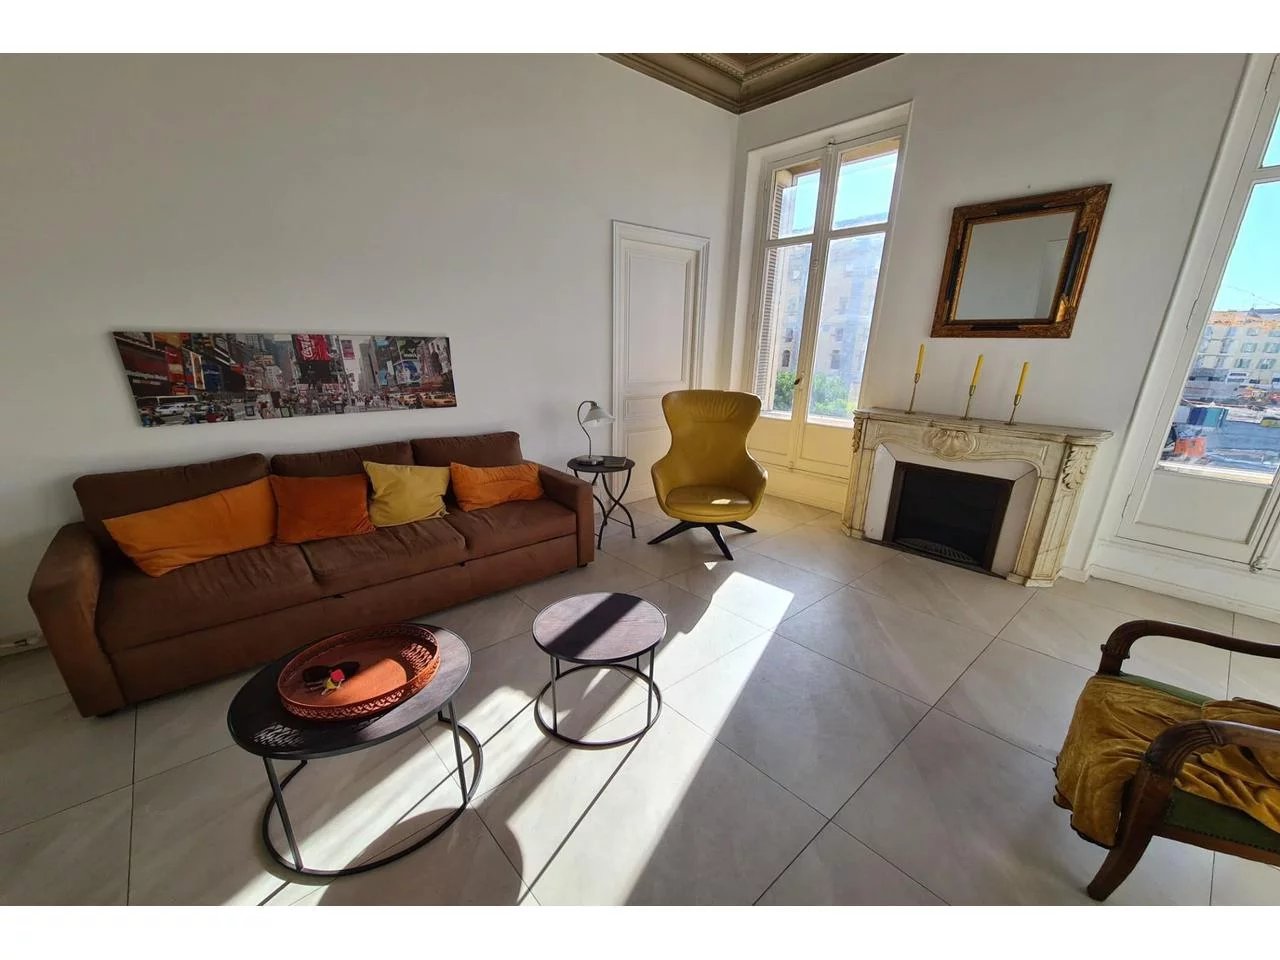 Appartement  4 Rooms 108.2m2  for sale   740 000 €